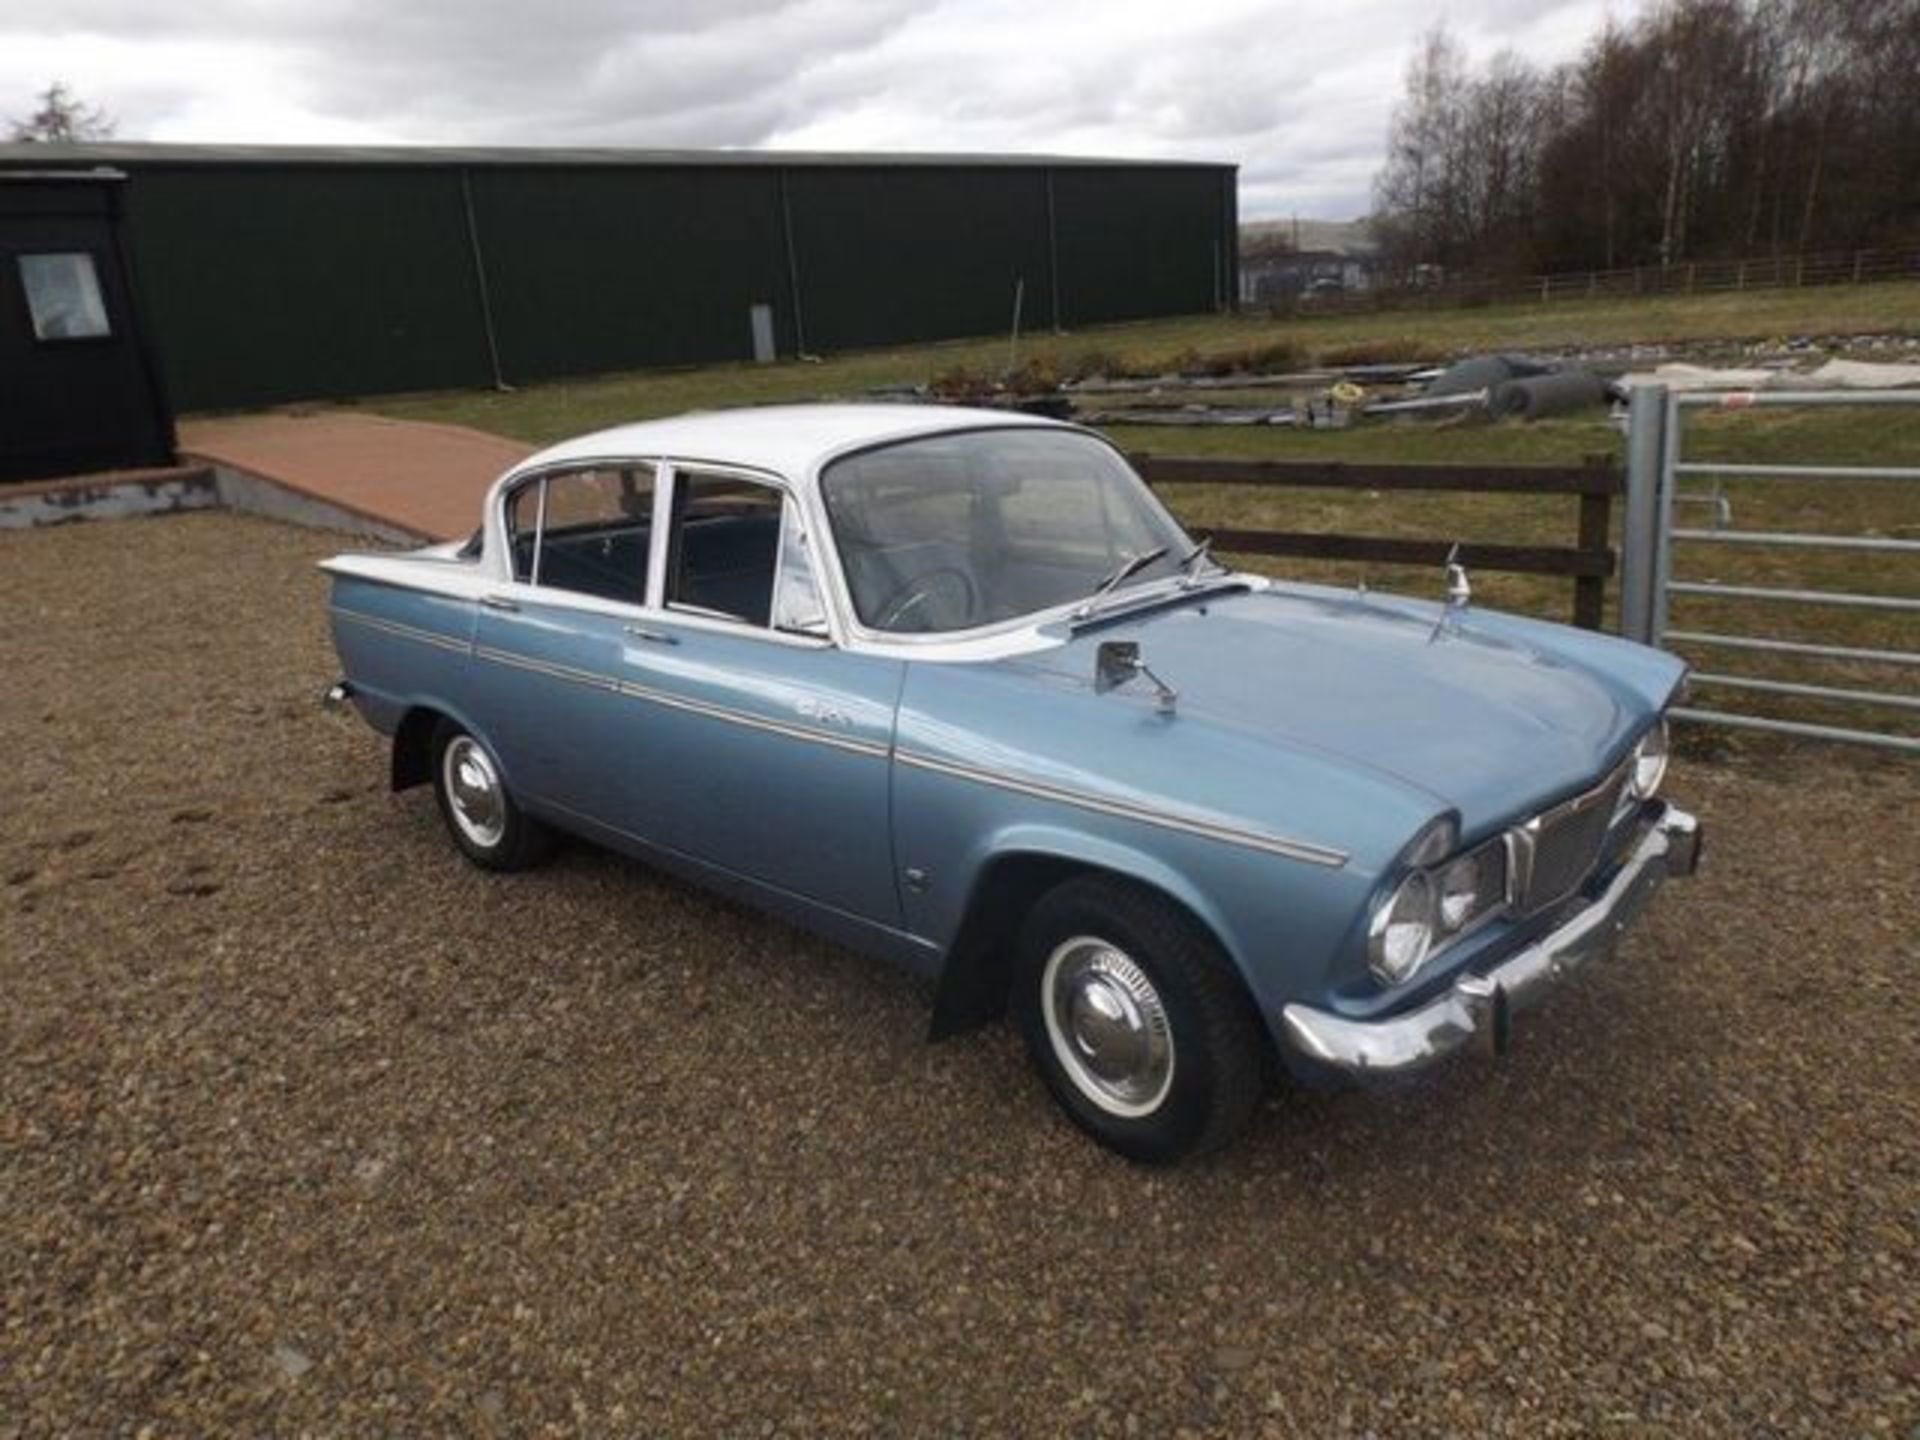 HUMBER, SCEPTRE MKII - 1725cc, Chassis number B1320056320DHS0 - this is a Mark II example which - Image 4 of 18